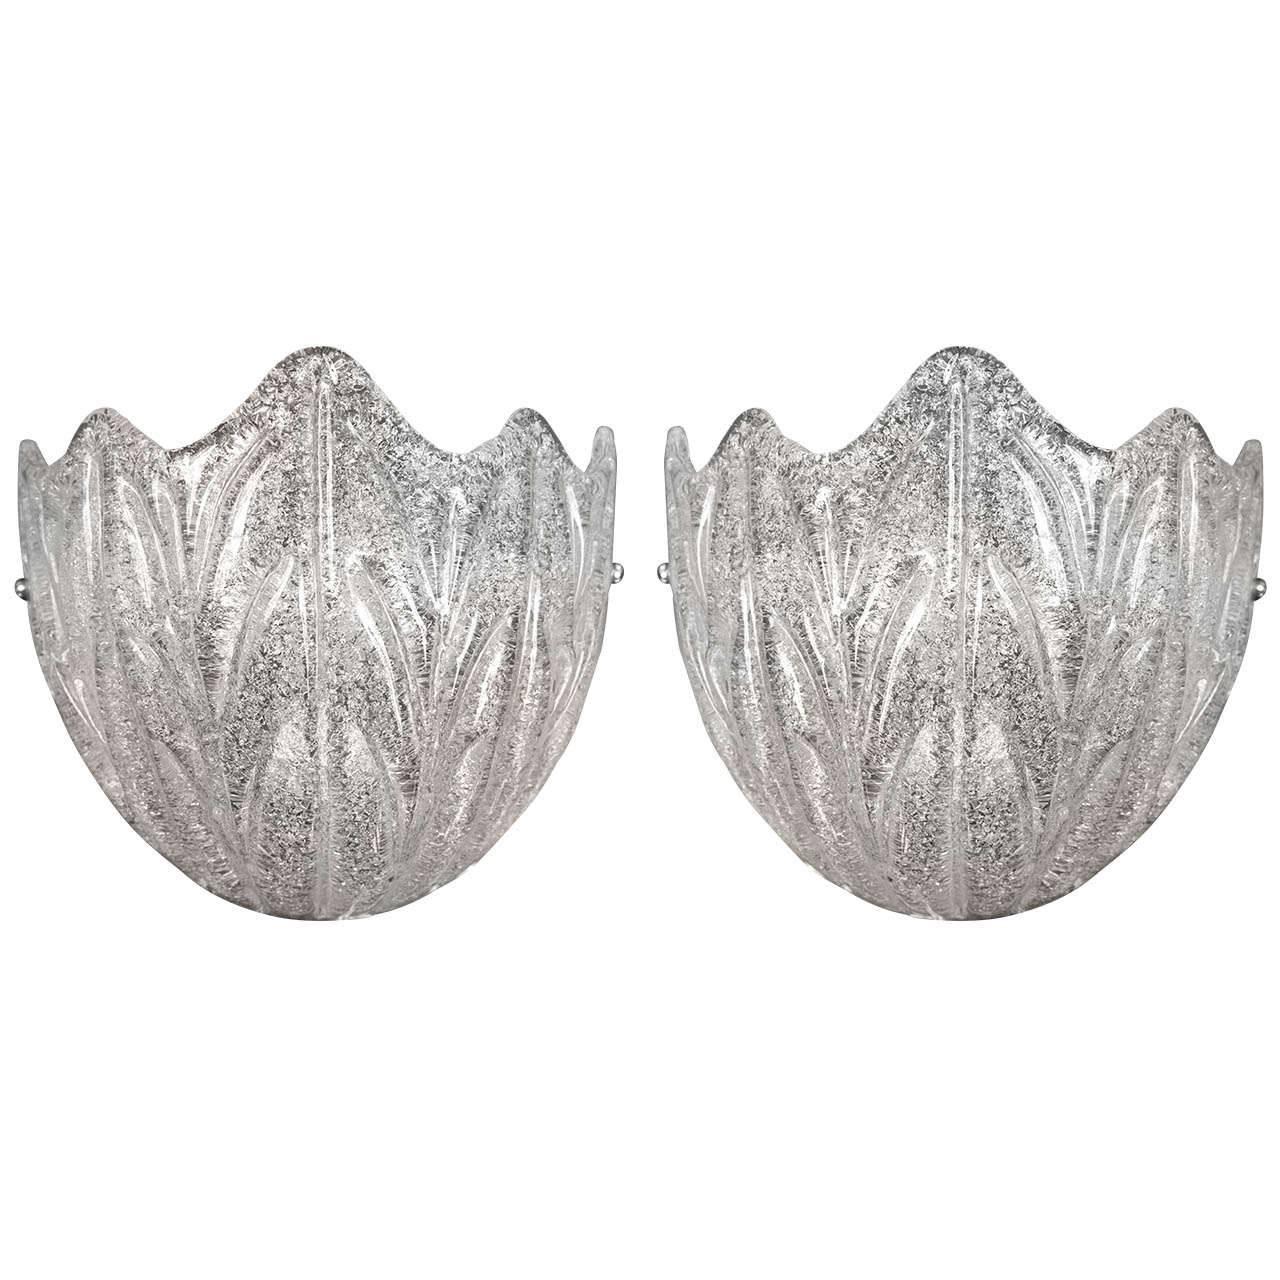 Pair of Modern Icy Sconces For Sale